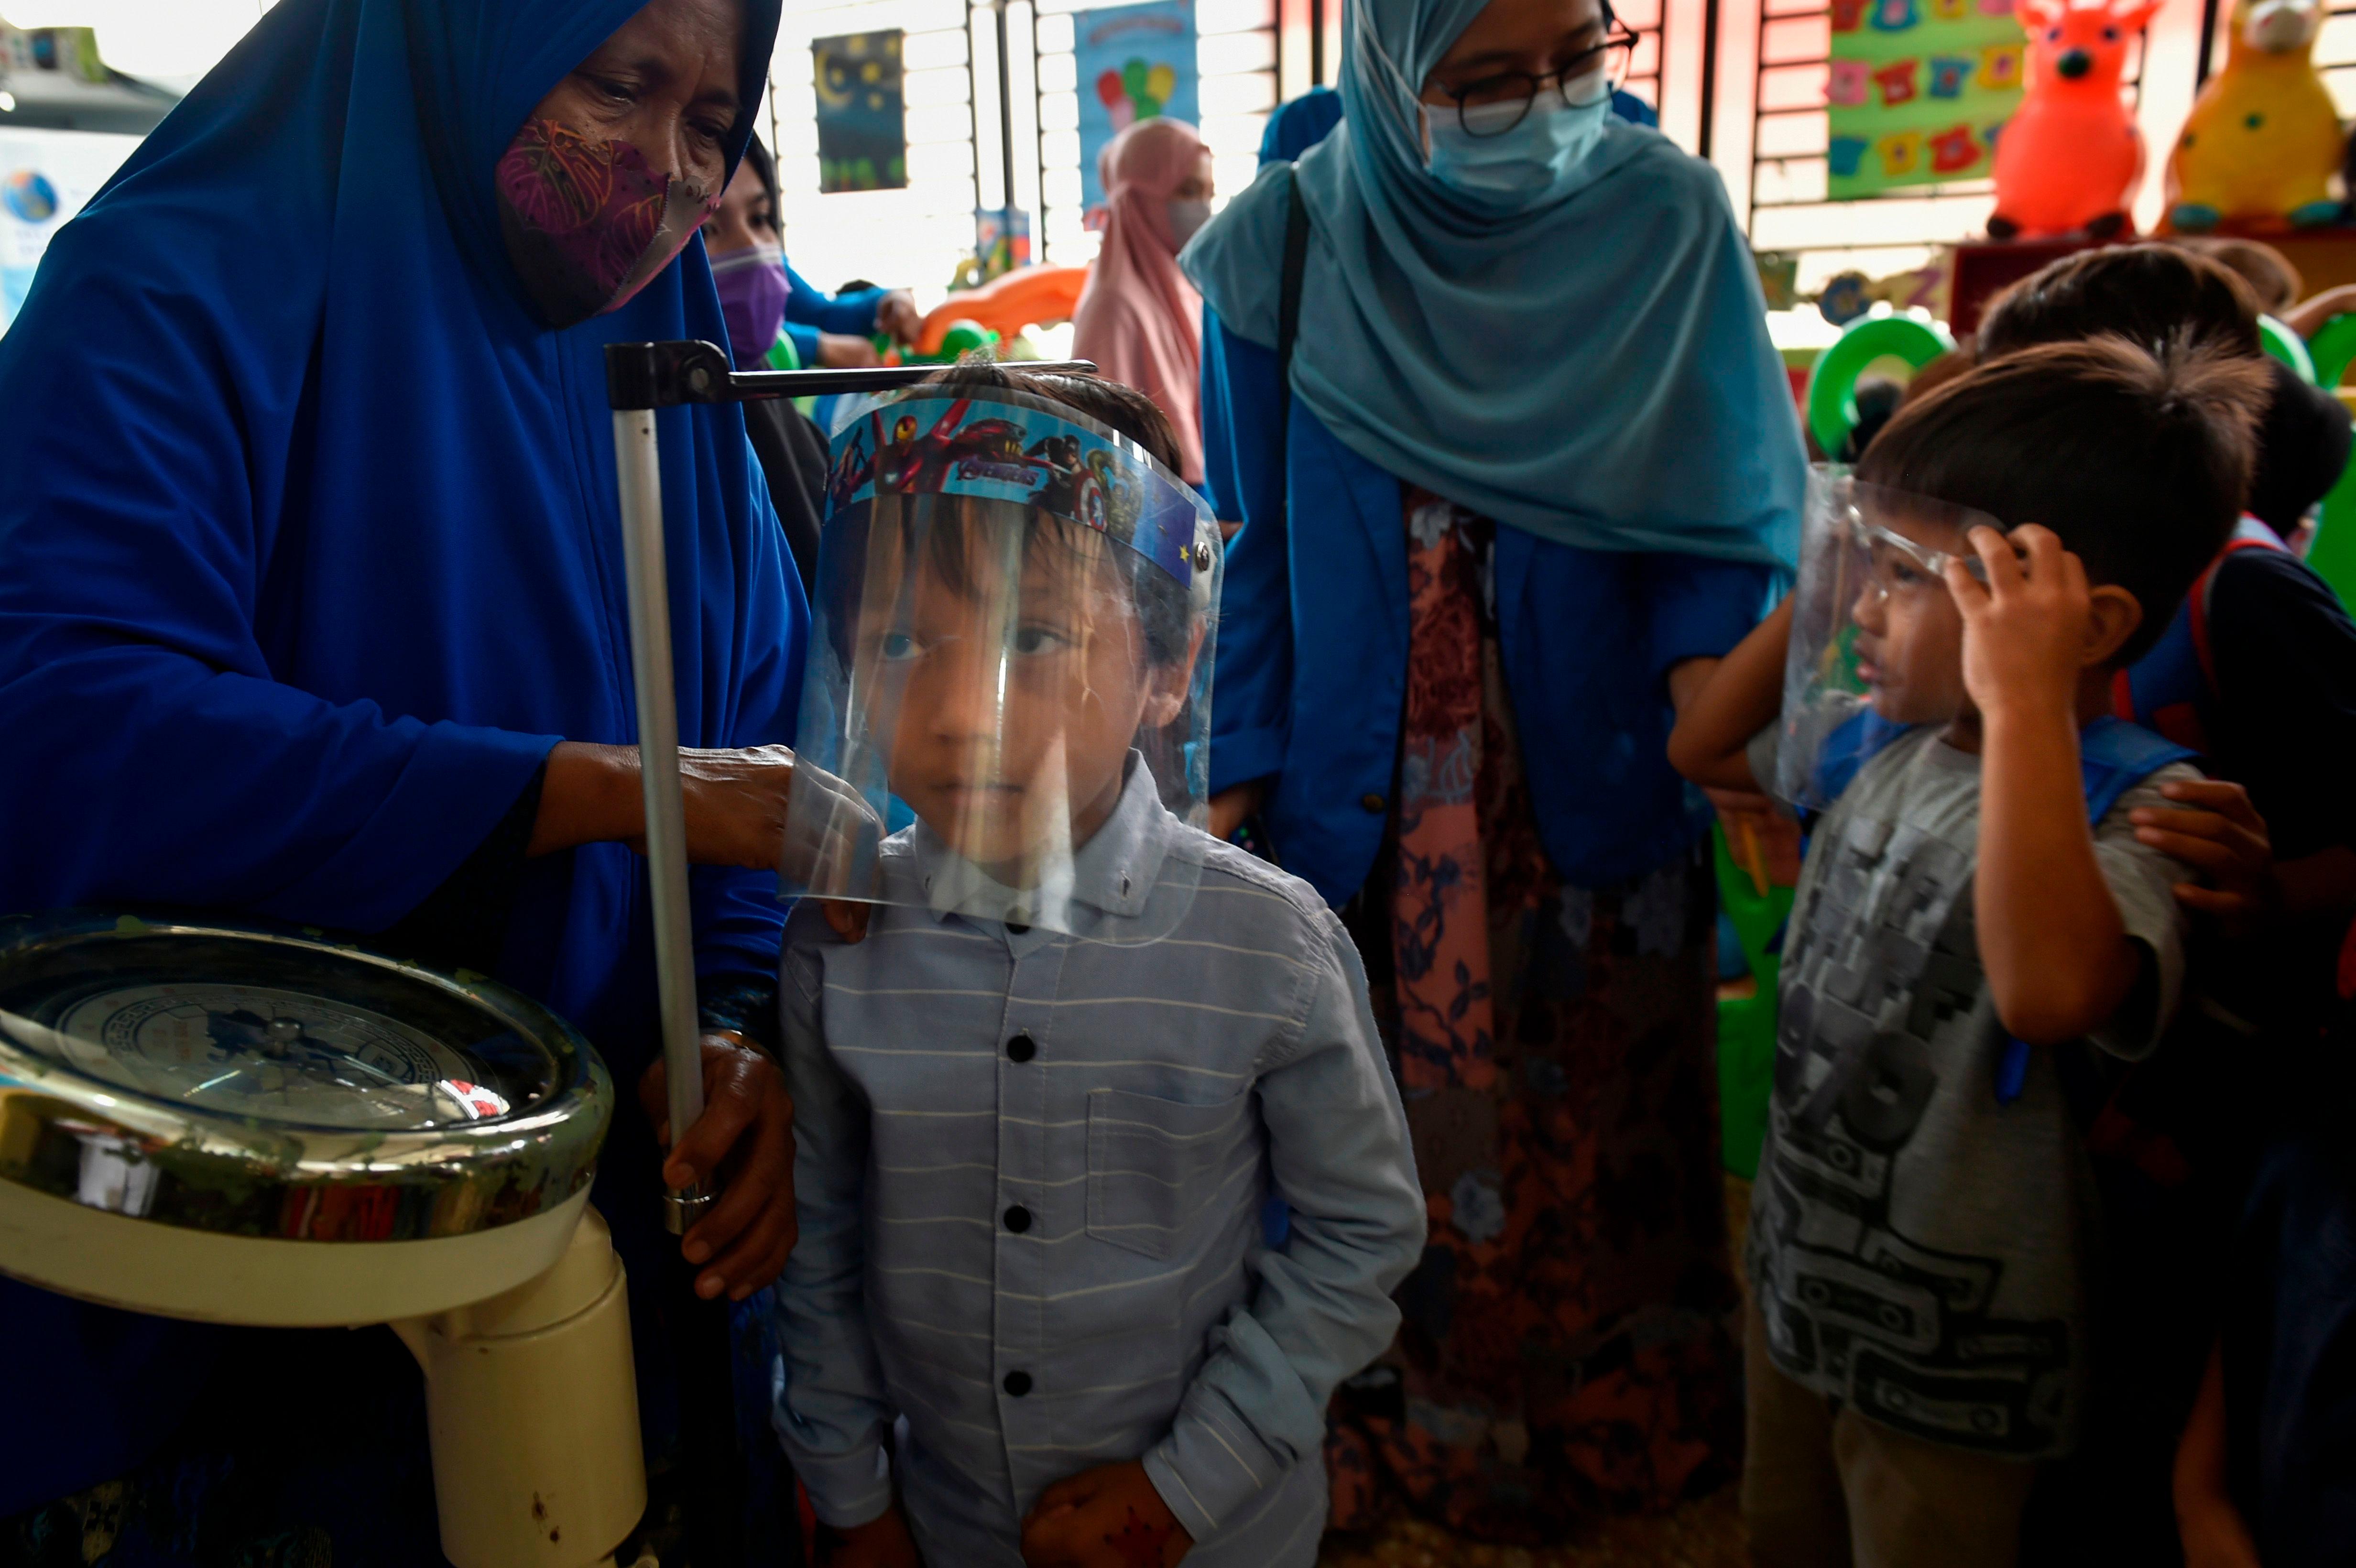 A child's measurements are taken before receiving the measles and polio vaccines at a service post in Banda Aceh on November 4, 2020. (Photo by CHAIDEER MAHYUDDIN / AFP)